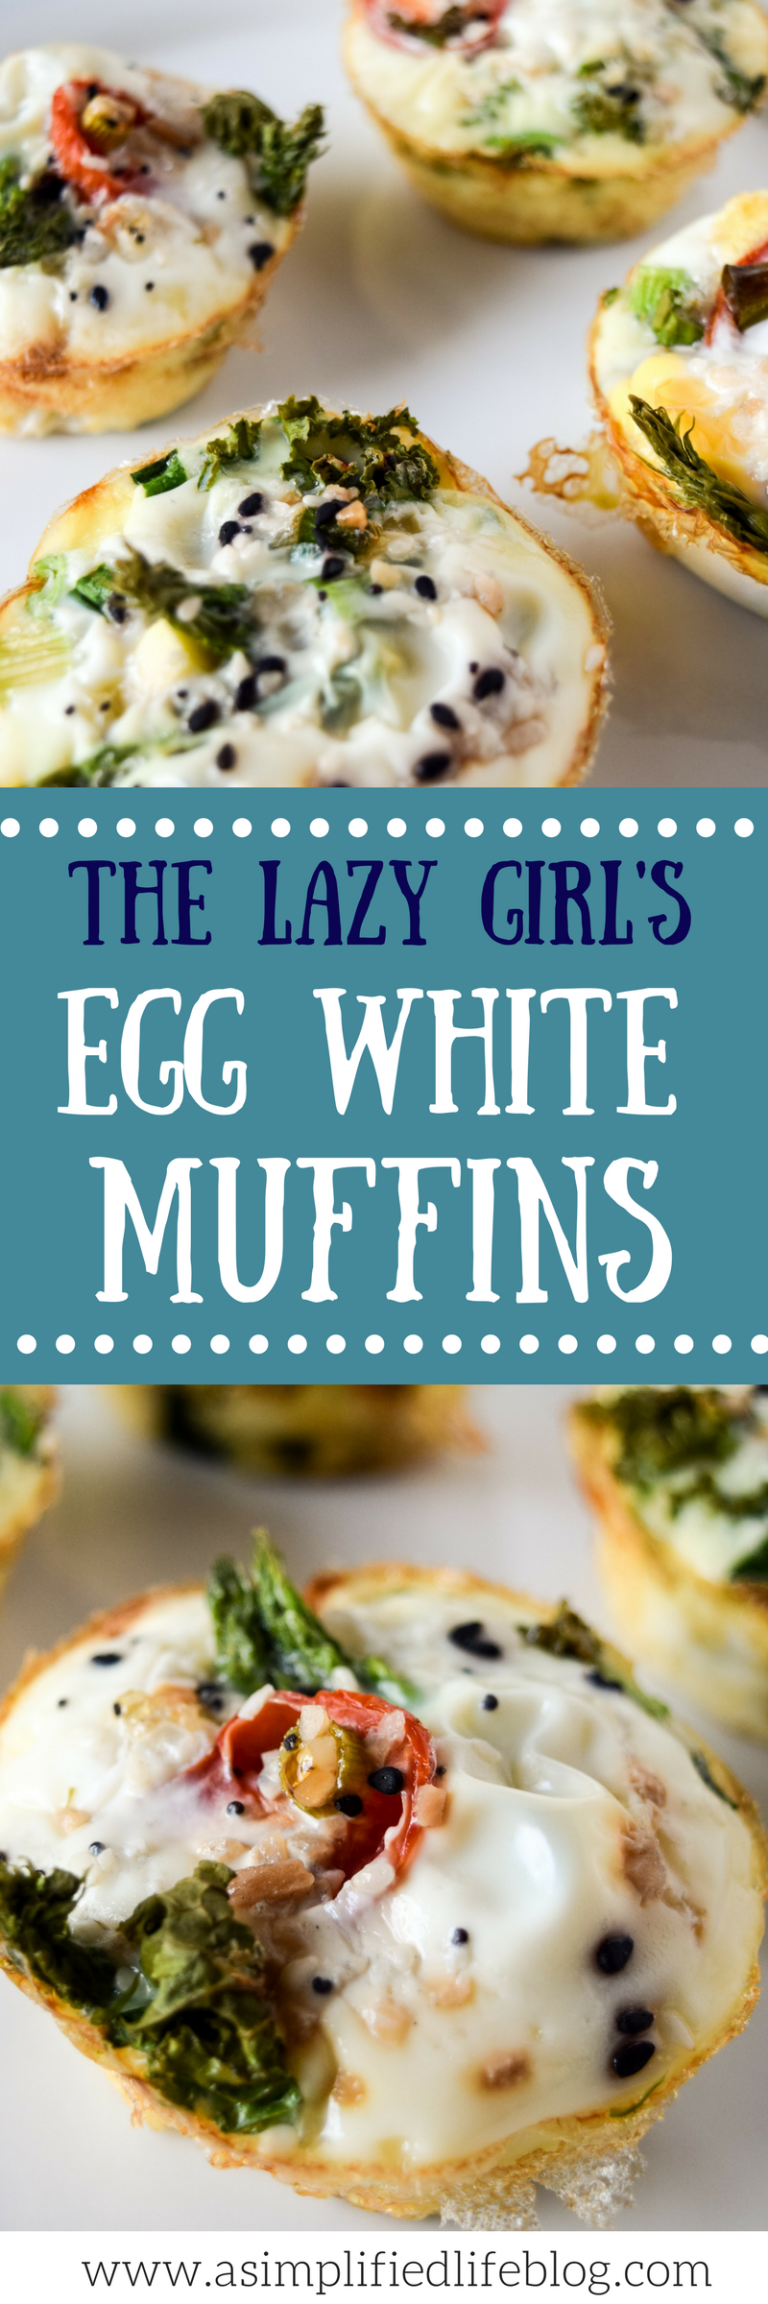 The Lazy Girl's Egg White Muffins - A Simplified Life